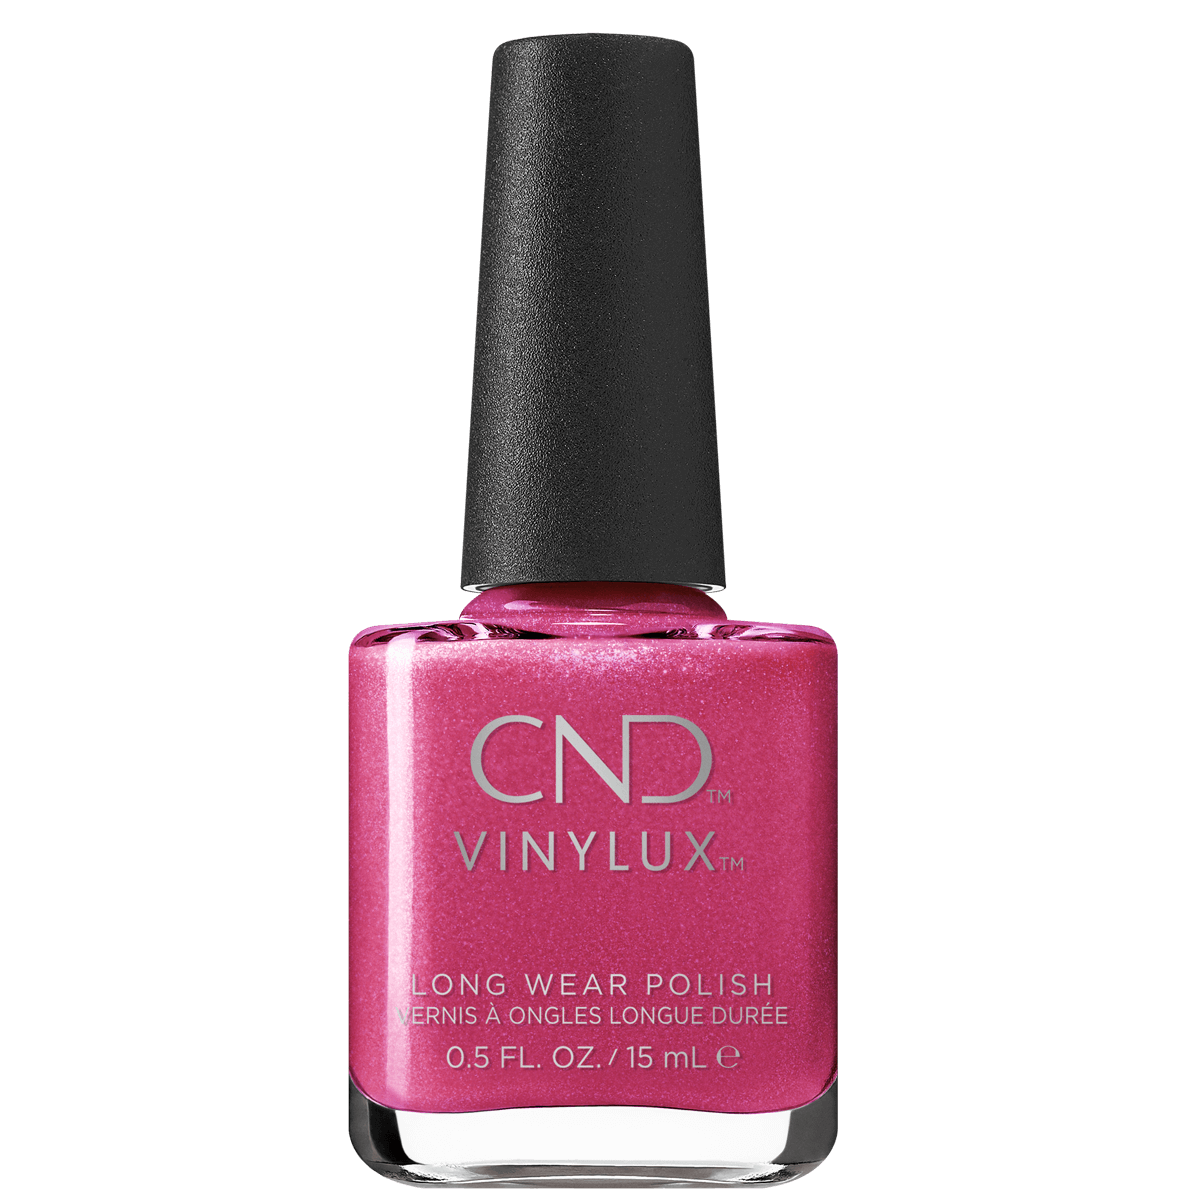 Vinylux CND Vernis à Ongles #414 Happy Go Lucky 15mL